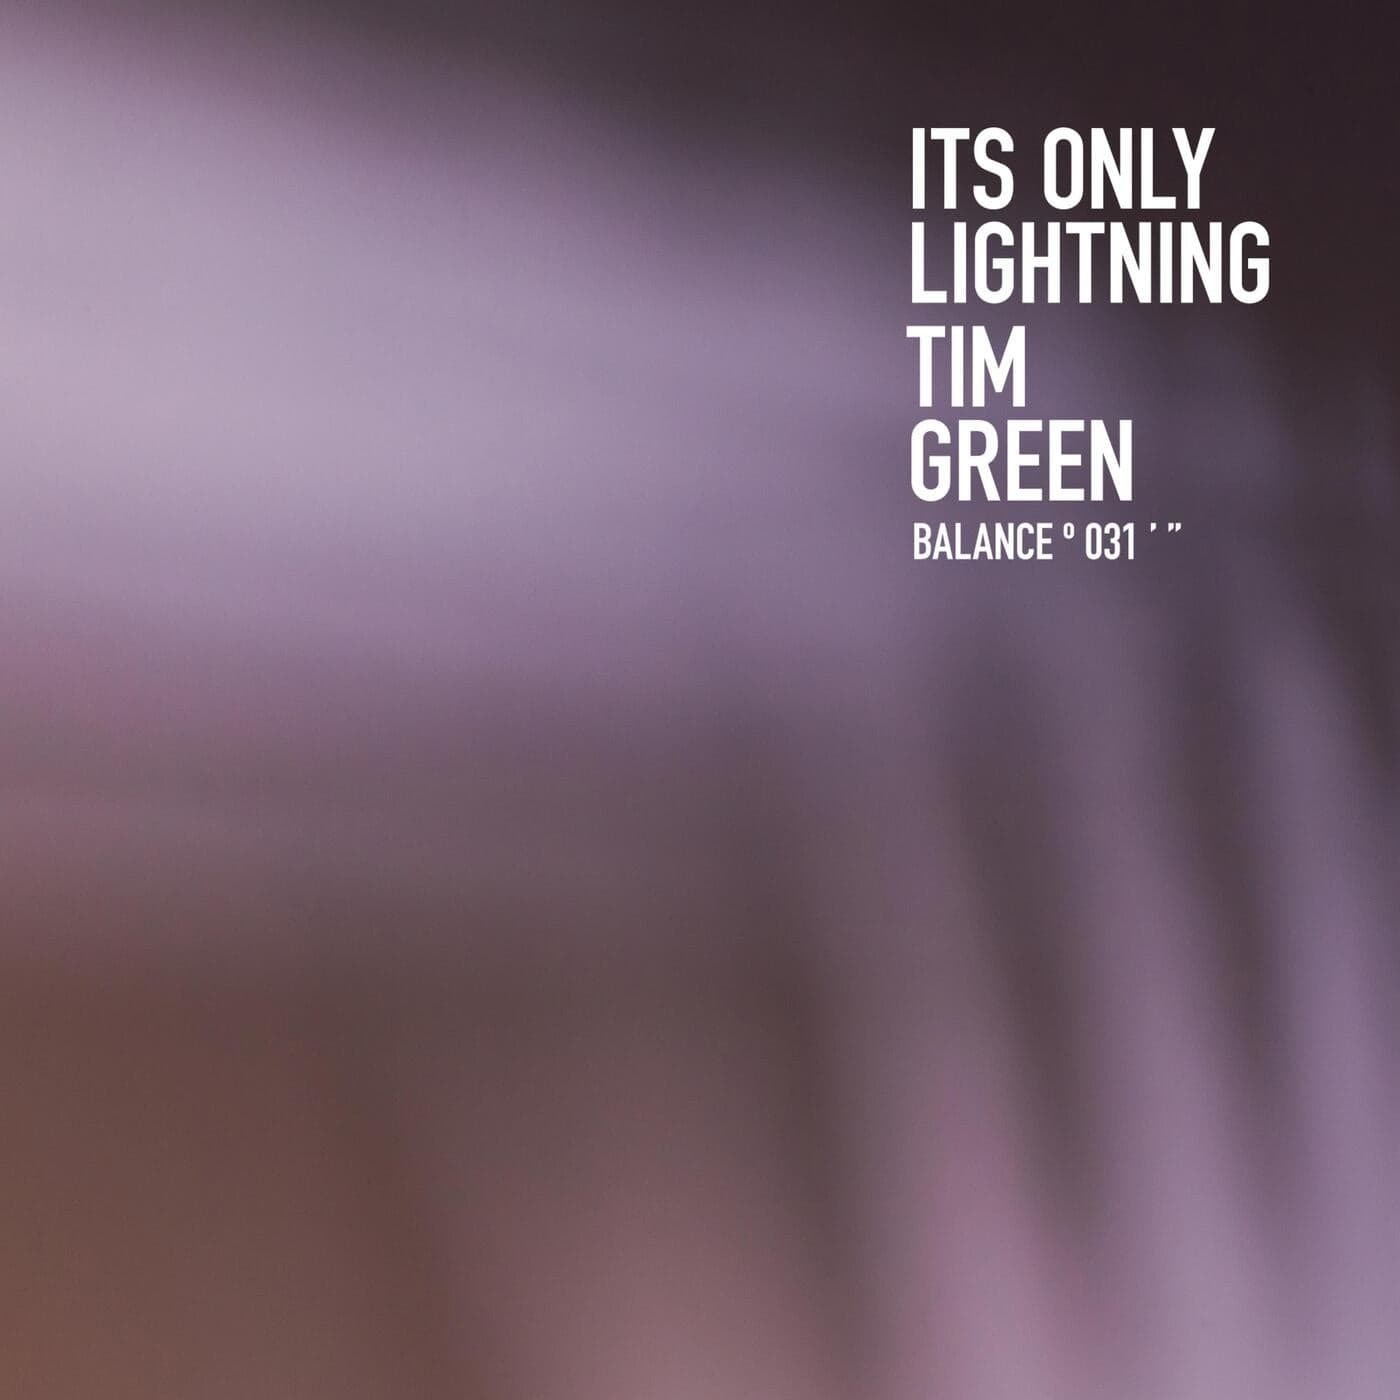 Download Tim Green - It's Only Lightning on Electrobuzz